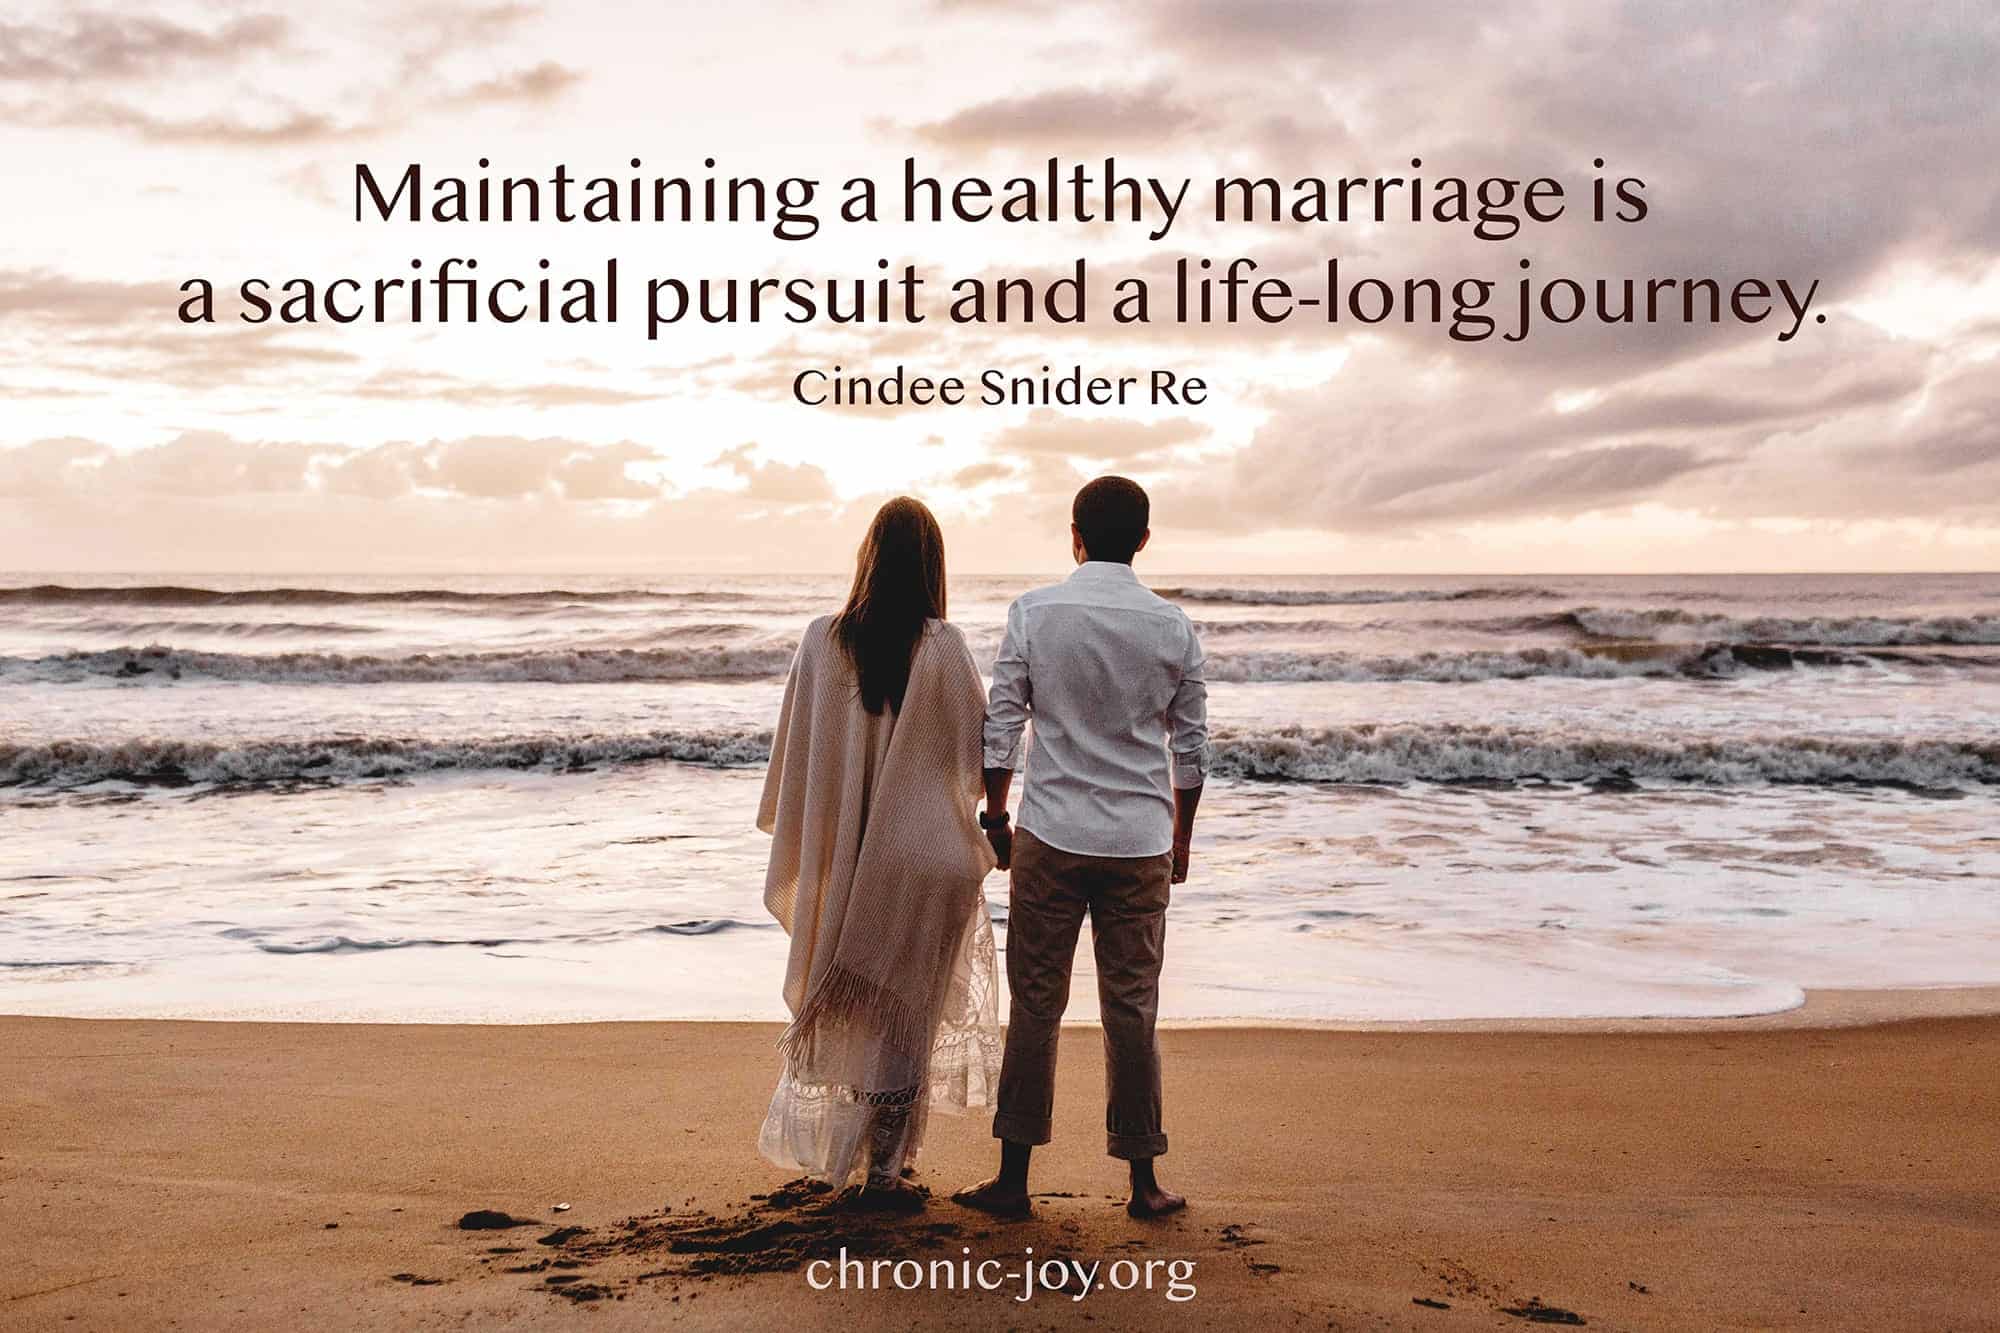 "Maintaining a healthy marriage is a sacrificial pursuit and a life-long journey." Cindee Snider Re